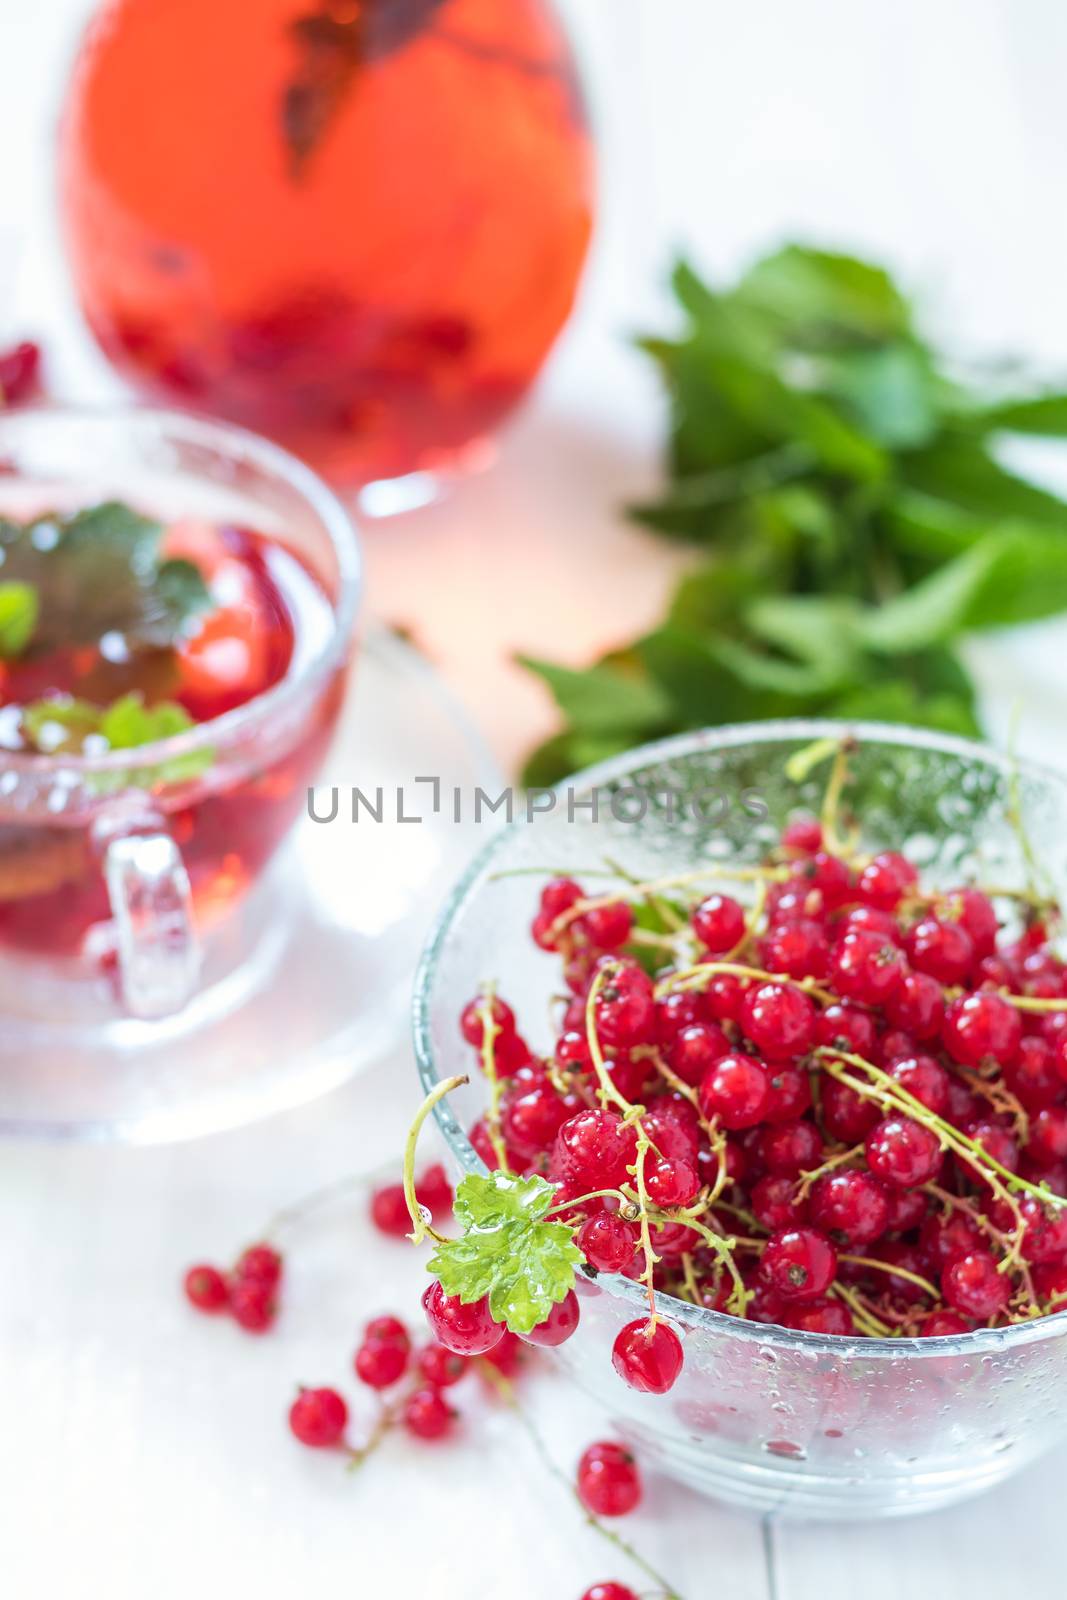 Fresh juicy redcurrant with dew drops in clear glass vase. Shallow depth of field